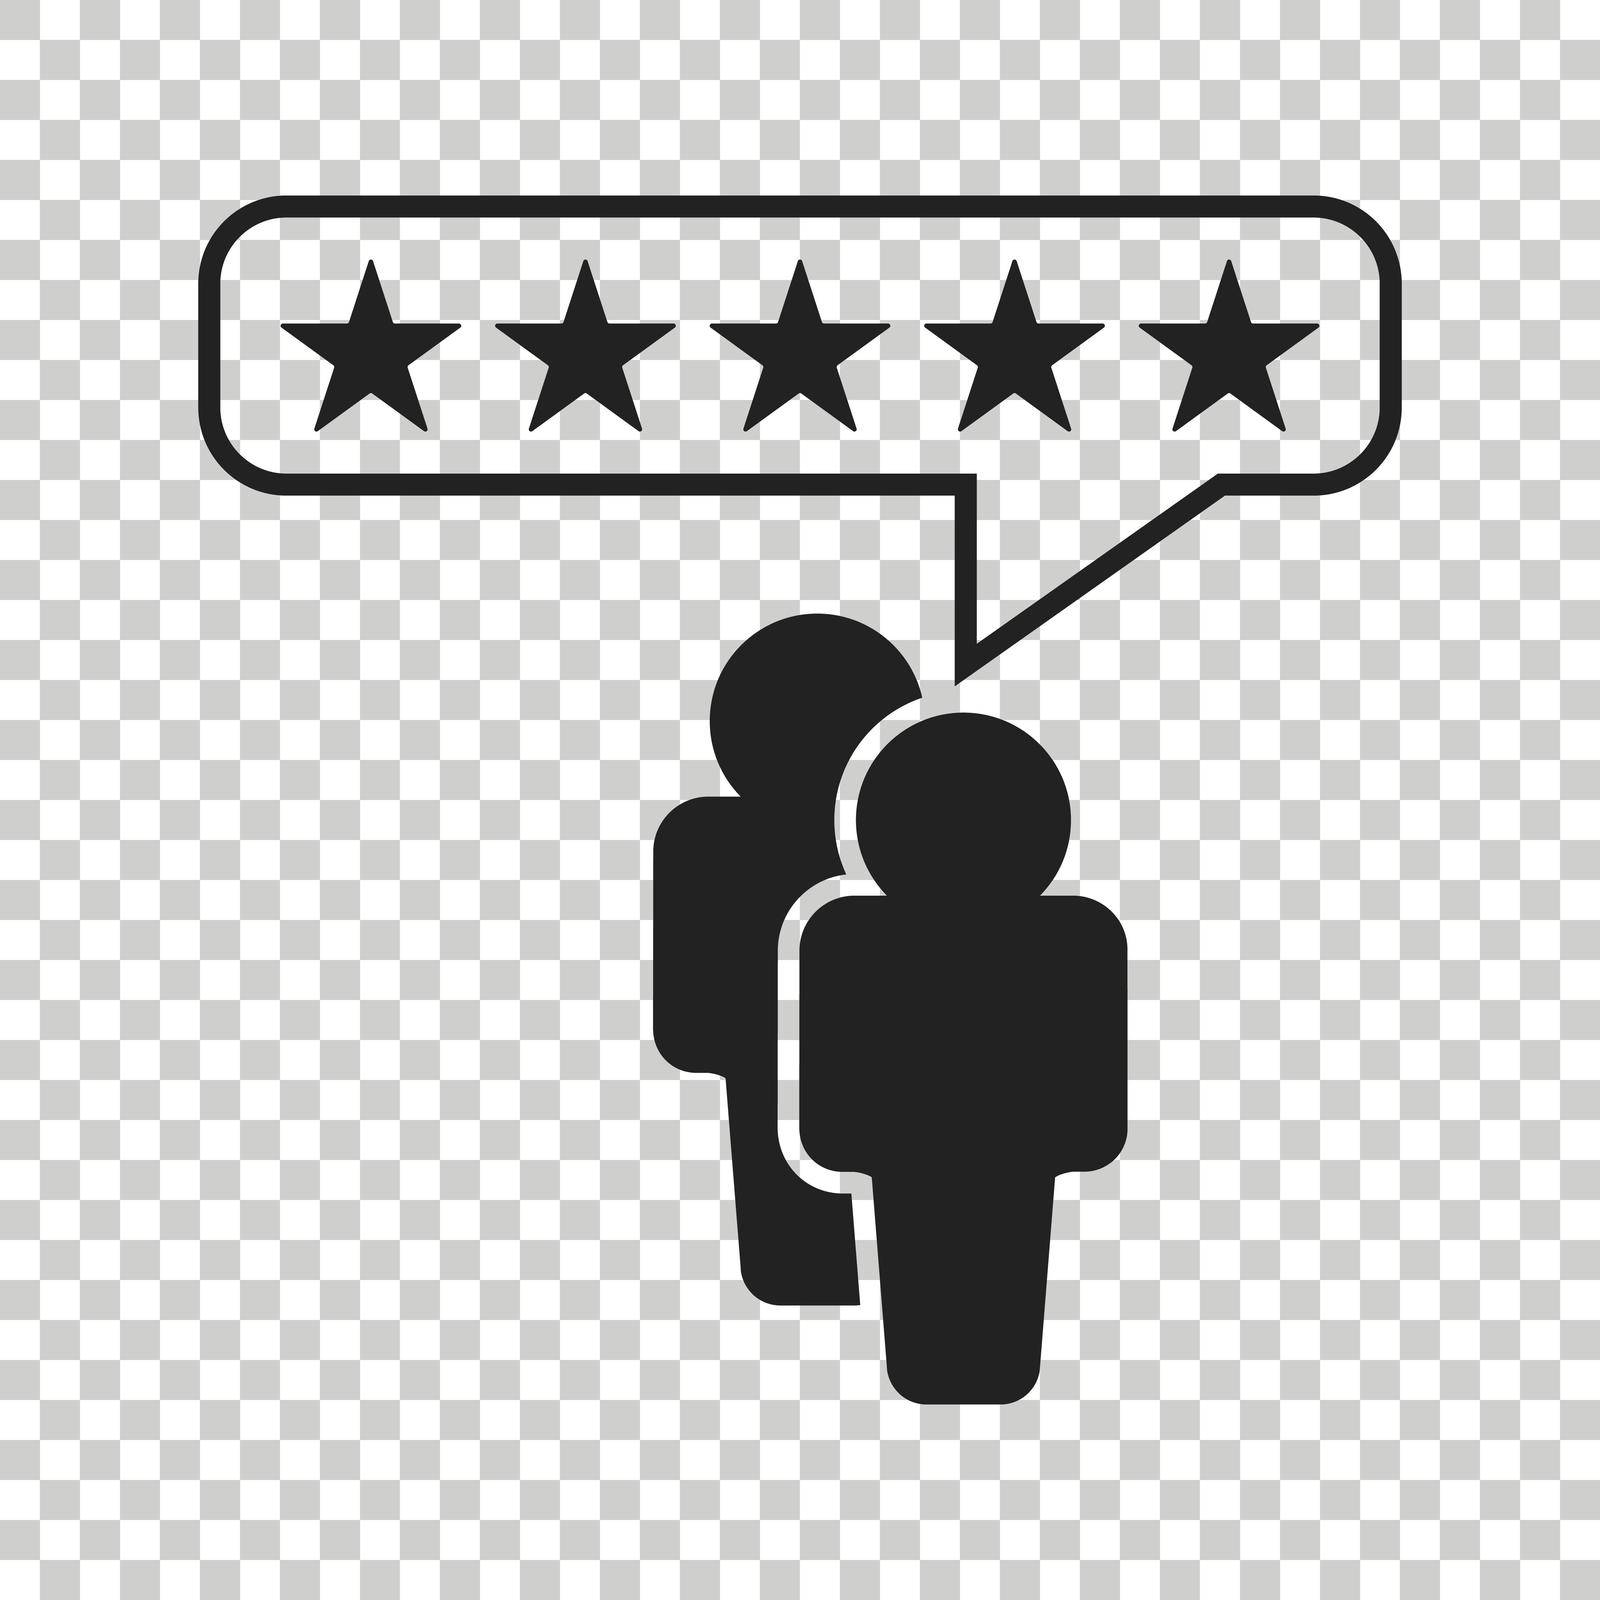 Customer reviews, rating, user feedback concept vector icon. Flat illustration on isolated background. by LysenkoA